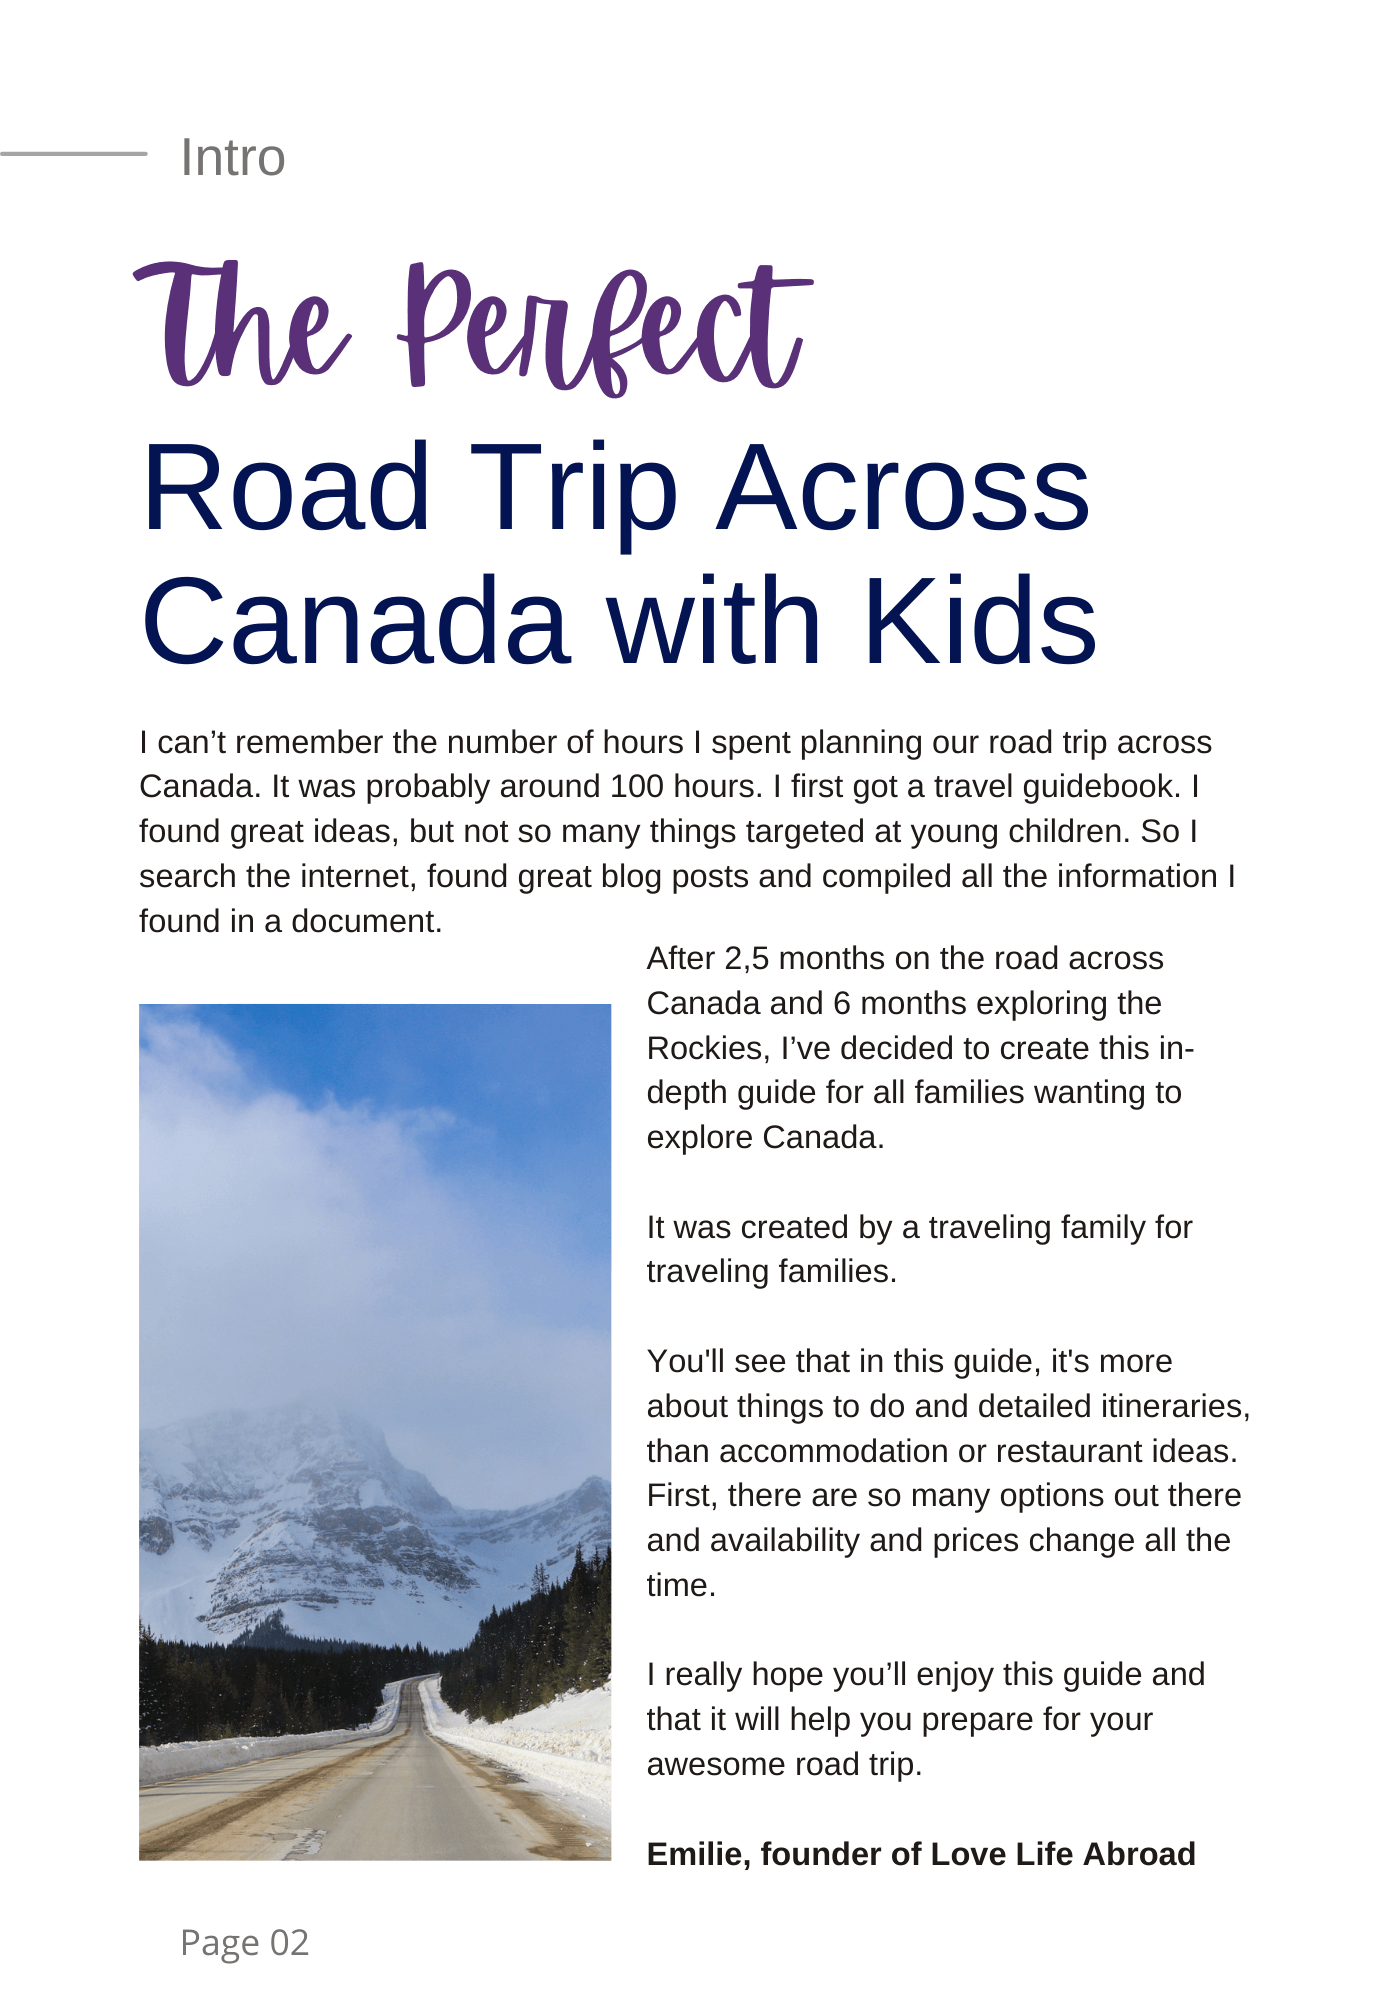 The Perfect Road Trip Across Canada With Kids page 3